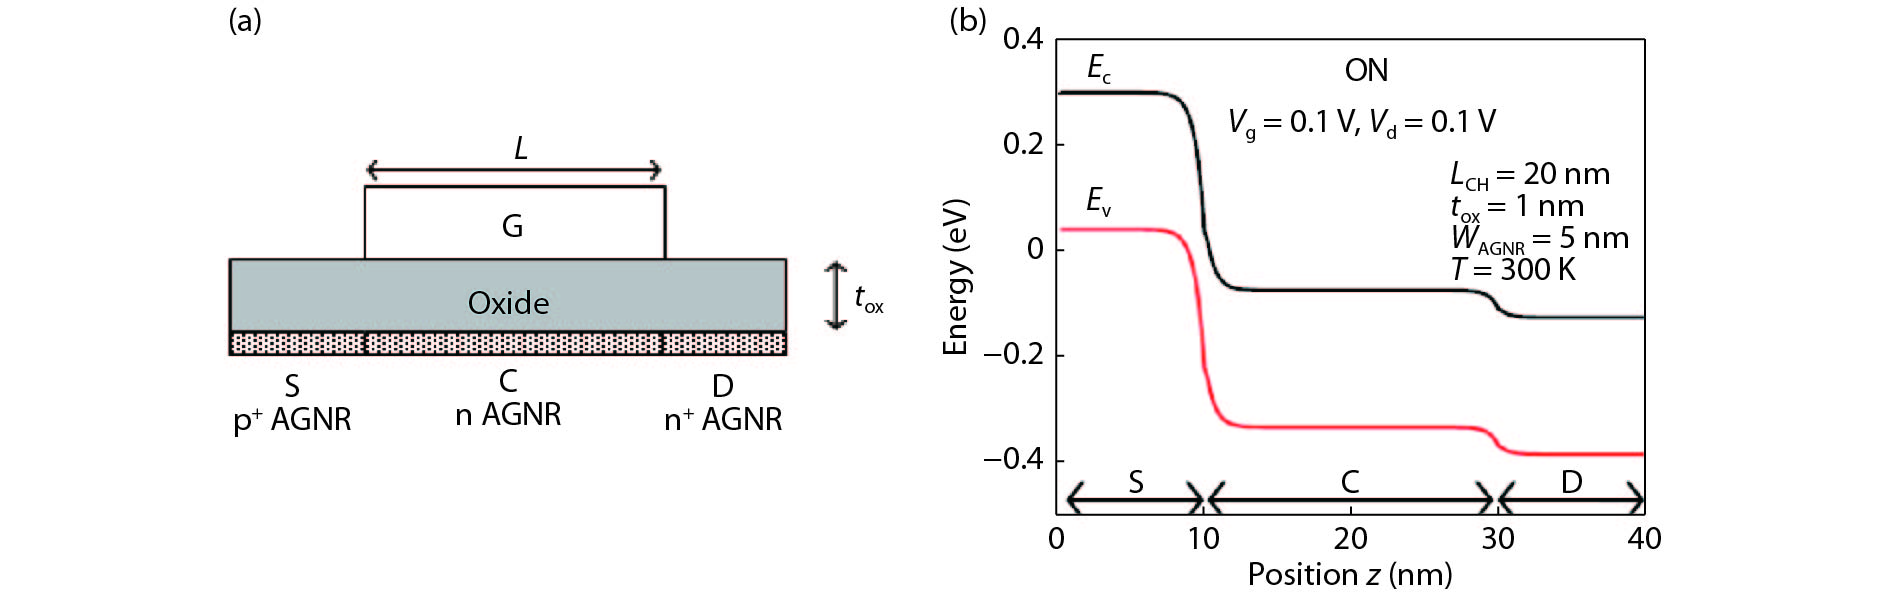 (Color online) (a) The device structure of the n-channel GNR-TFET. (b) The conduction band of the GNR-TFET after self-consistency achieved.